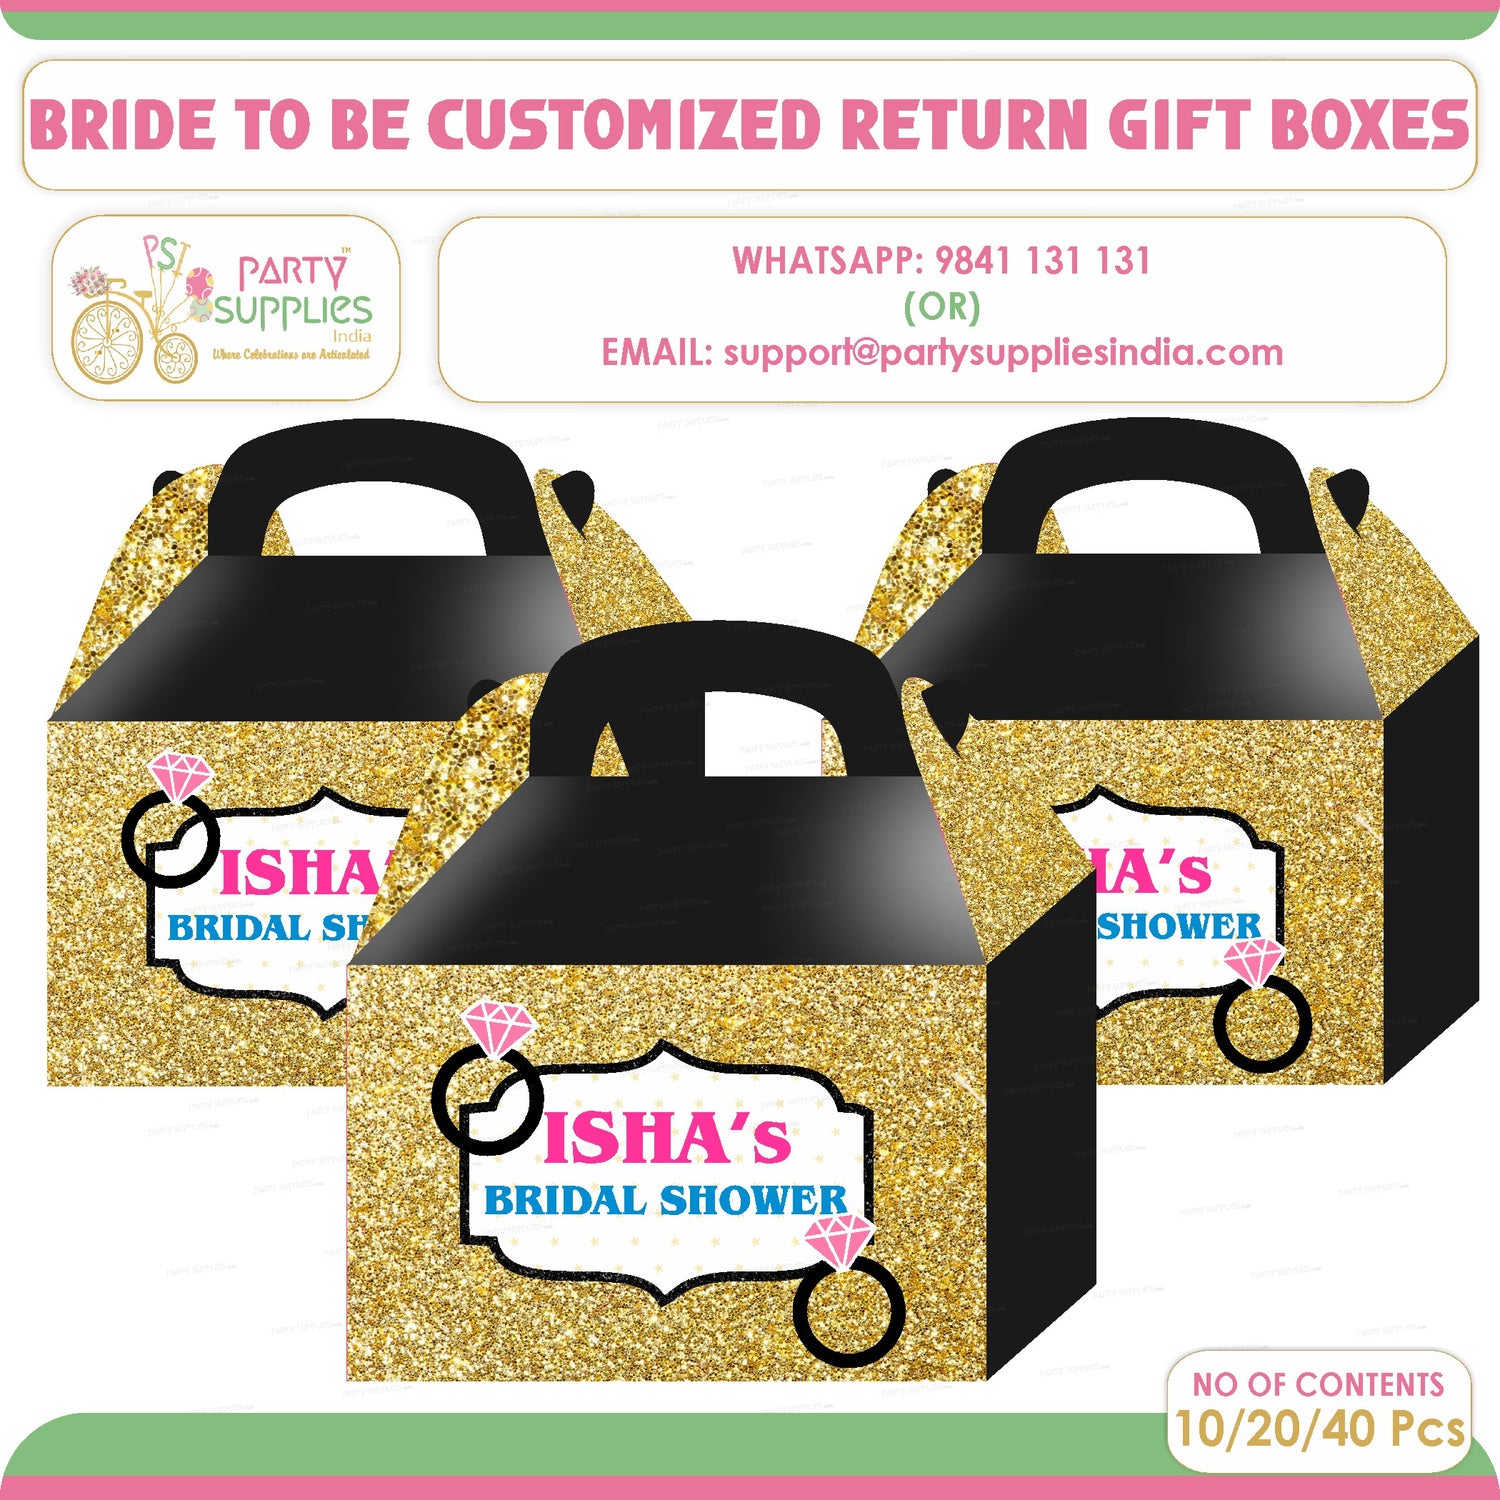 PSI  Bride to Be Theme Goodie Return Gift Boxes